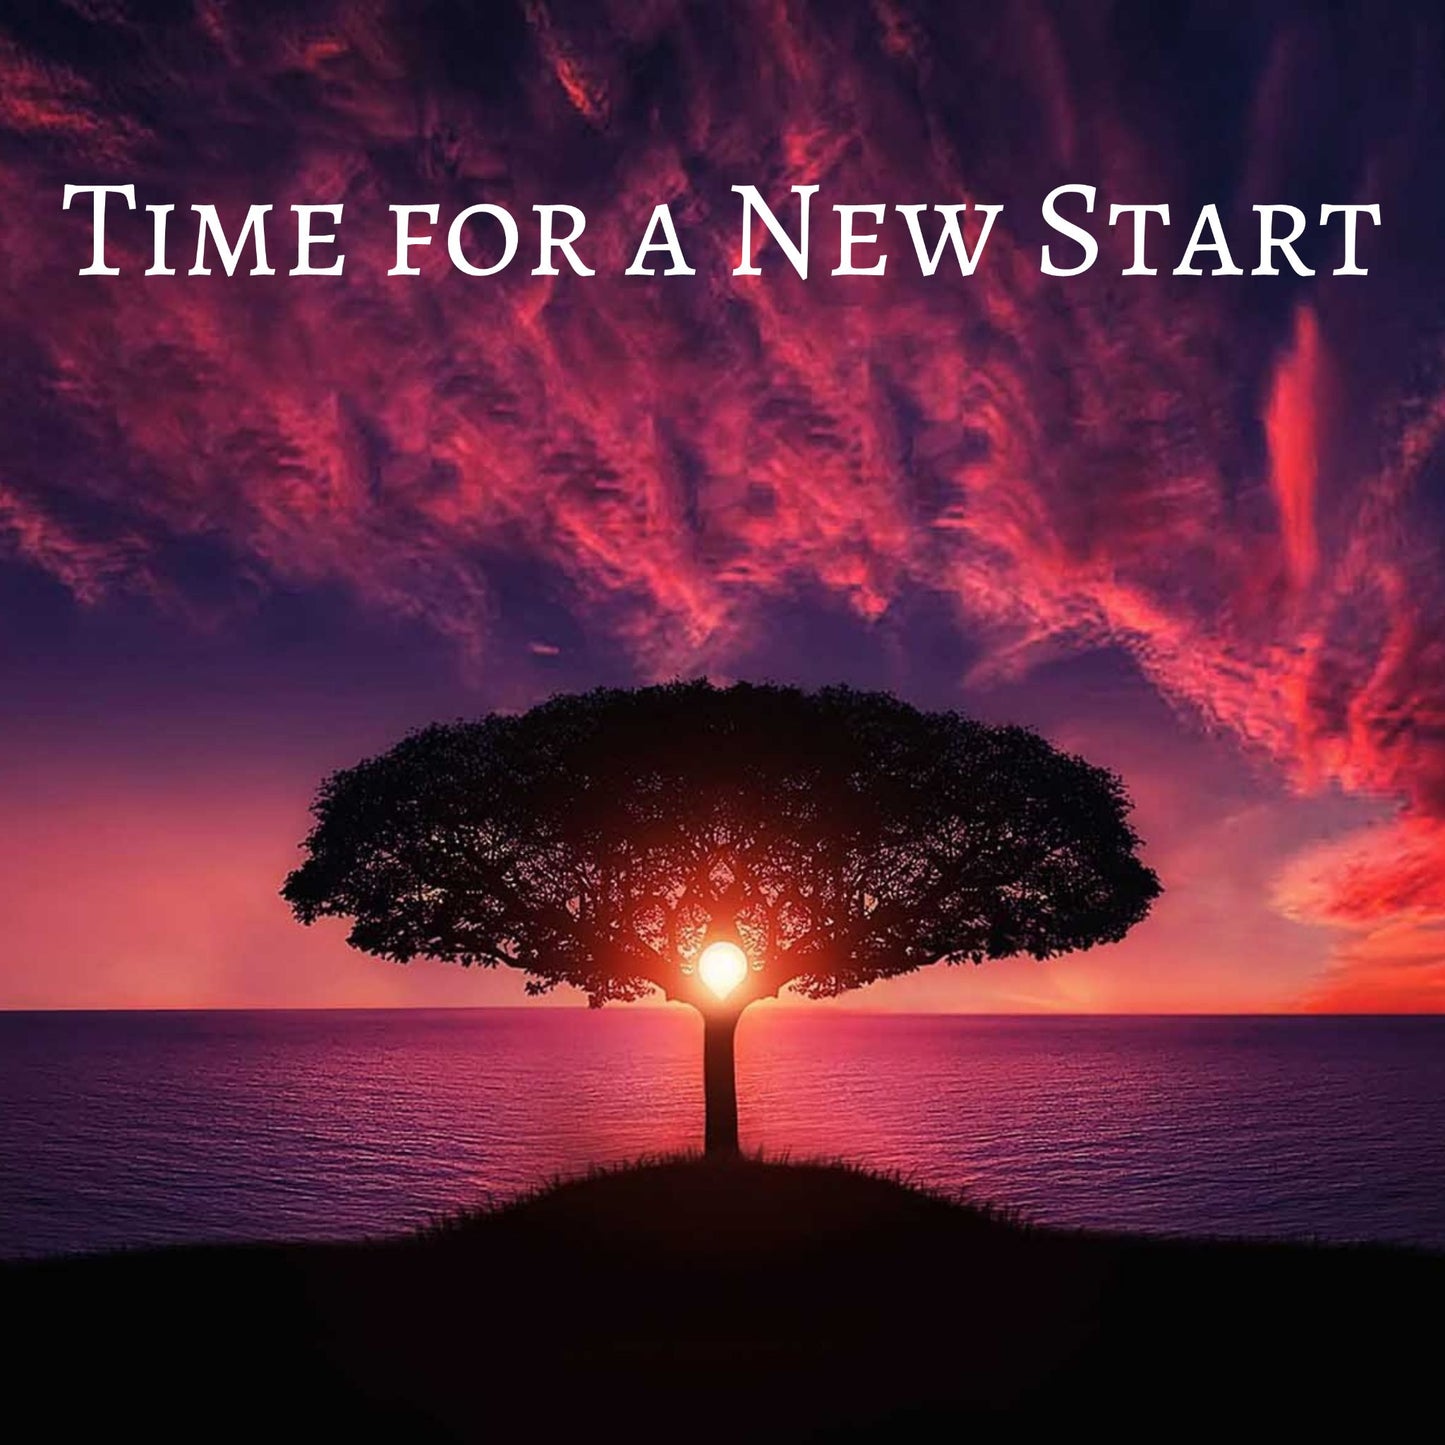 CD Cover of song Time for a New Start